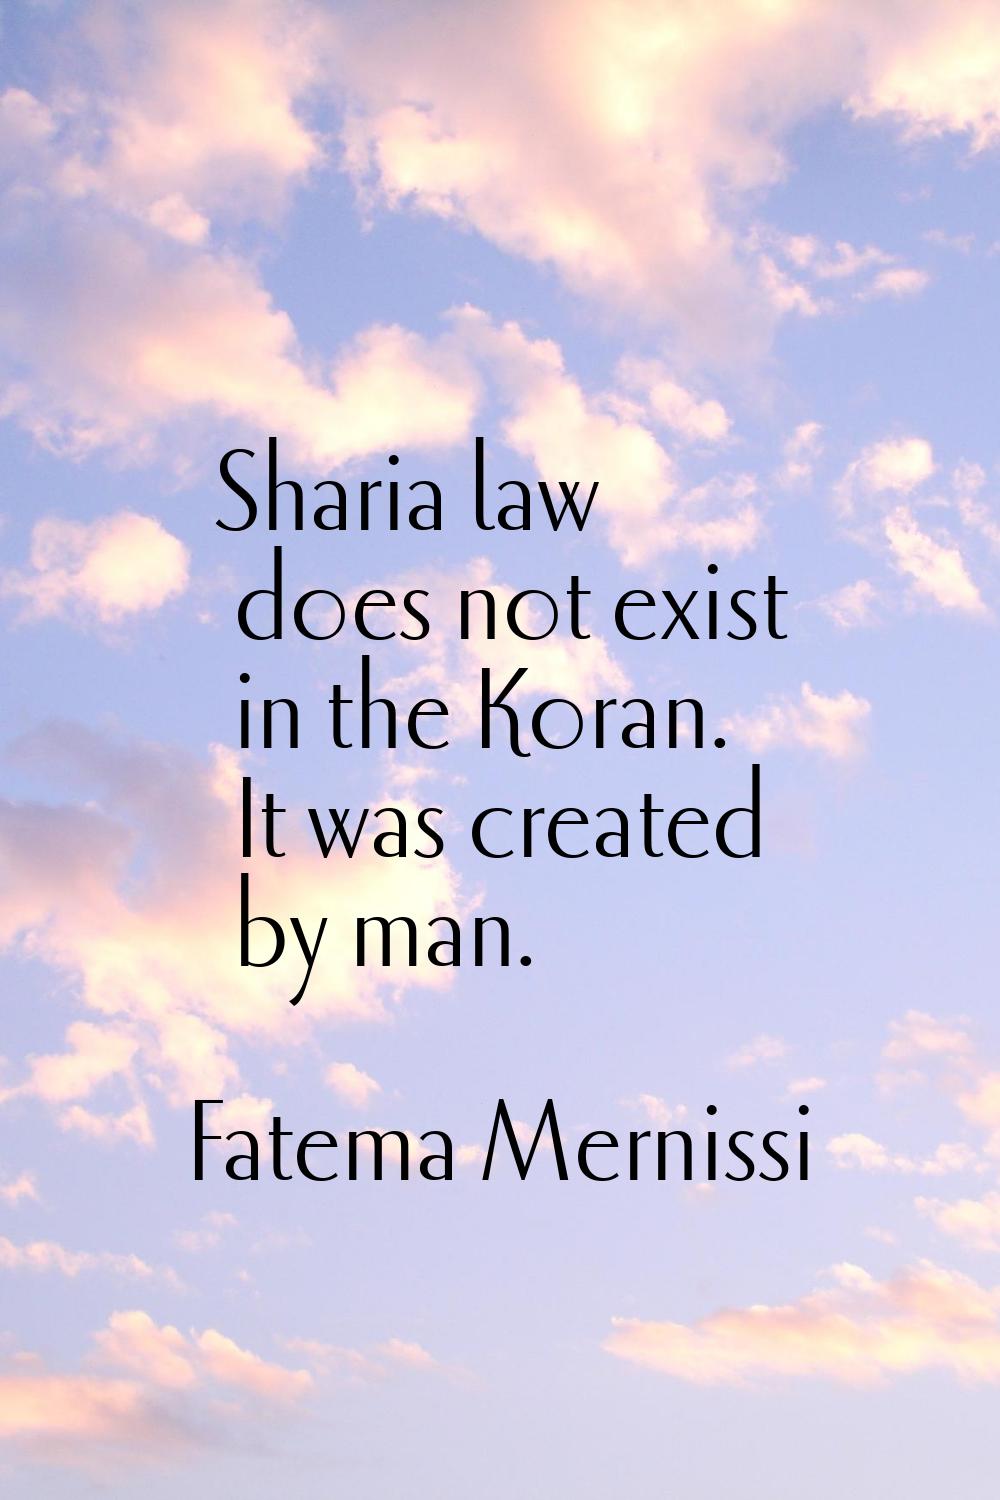 Sharia law does not exist in the Koran. It was created by man.